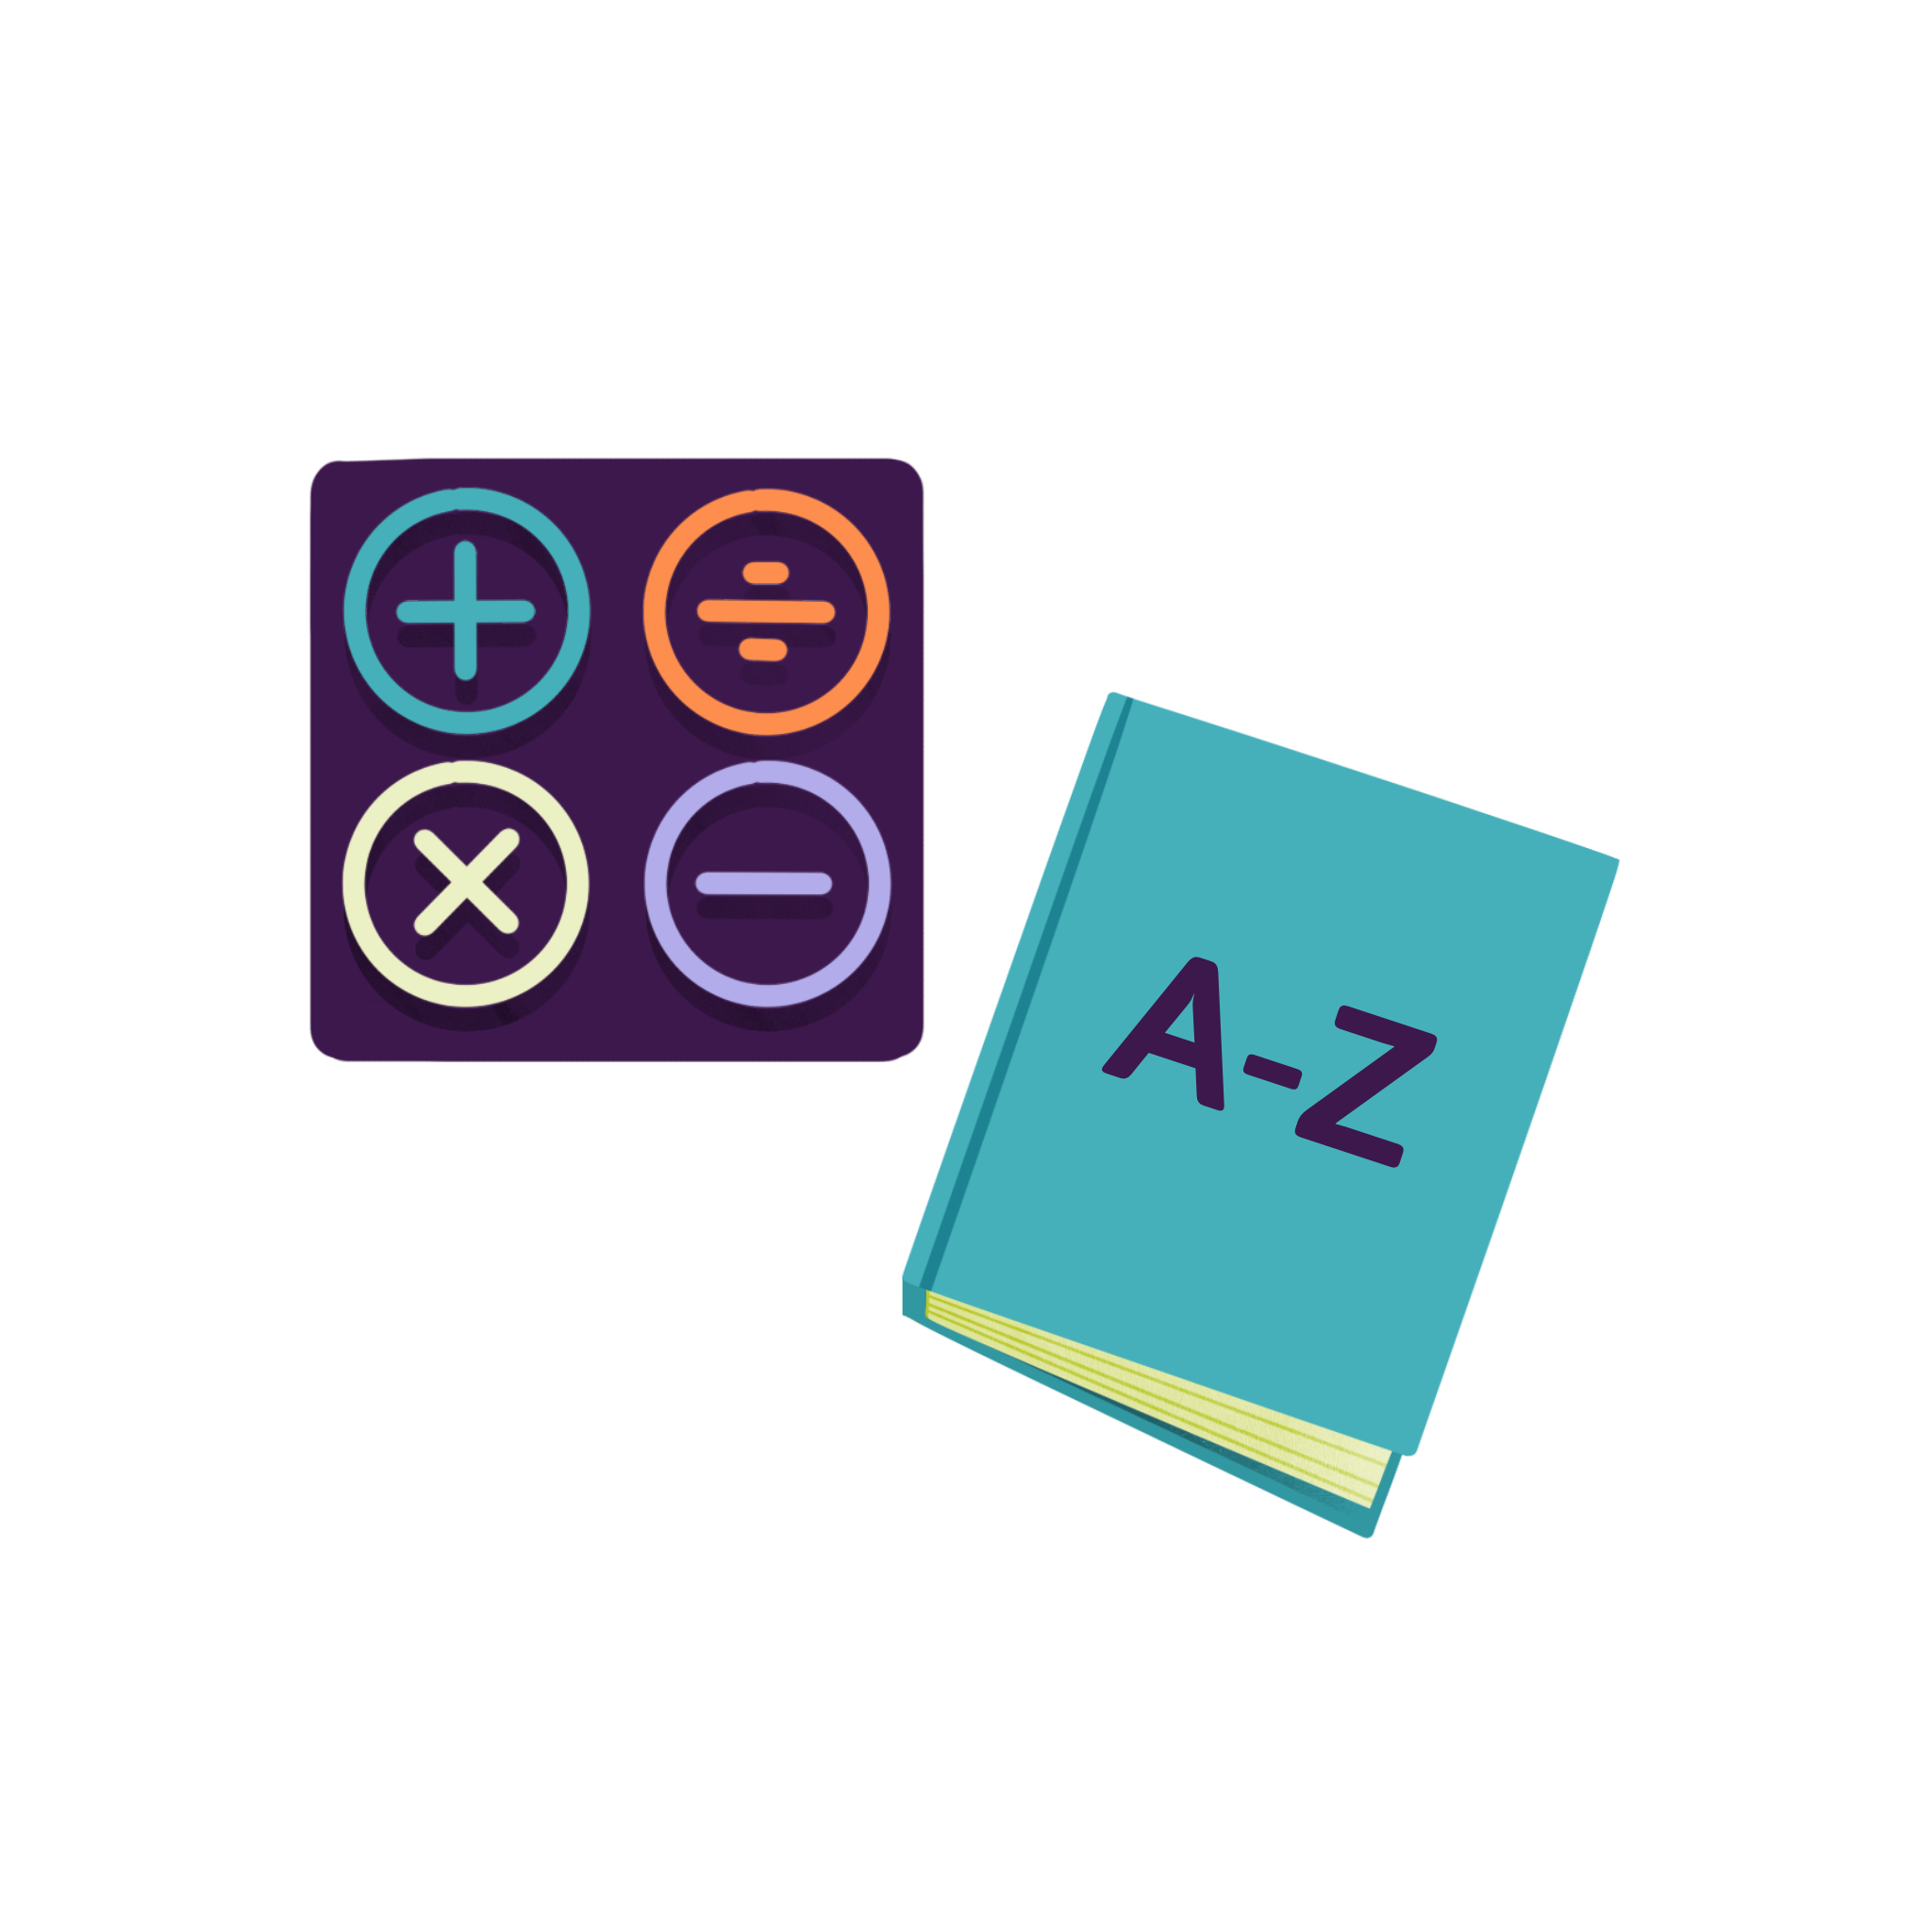 An illustration of a notebook labeled 'A-Z' and a square containing the mathematical symbols for addition, division, multiplication, and subtraction. Surrounding the two are constellations. 